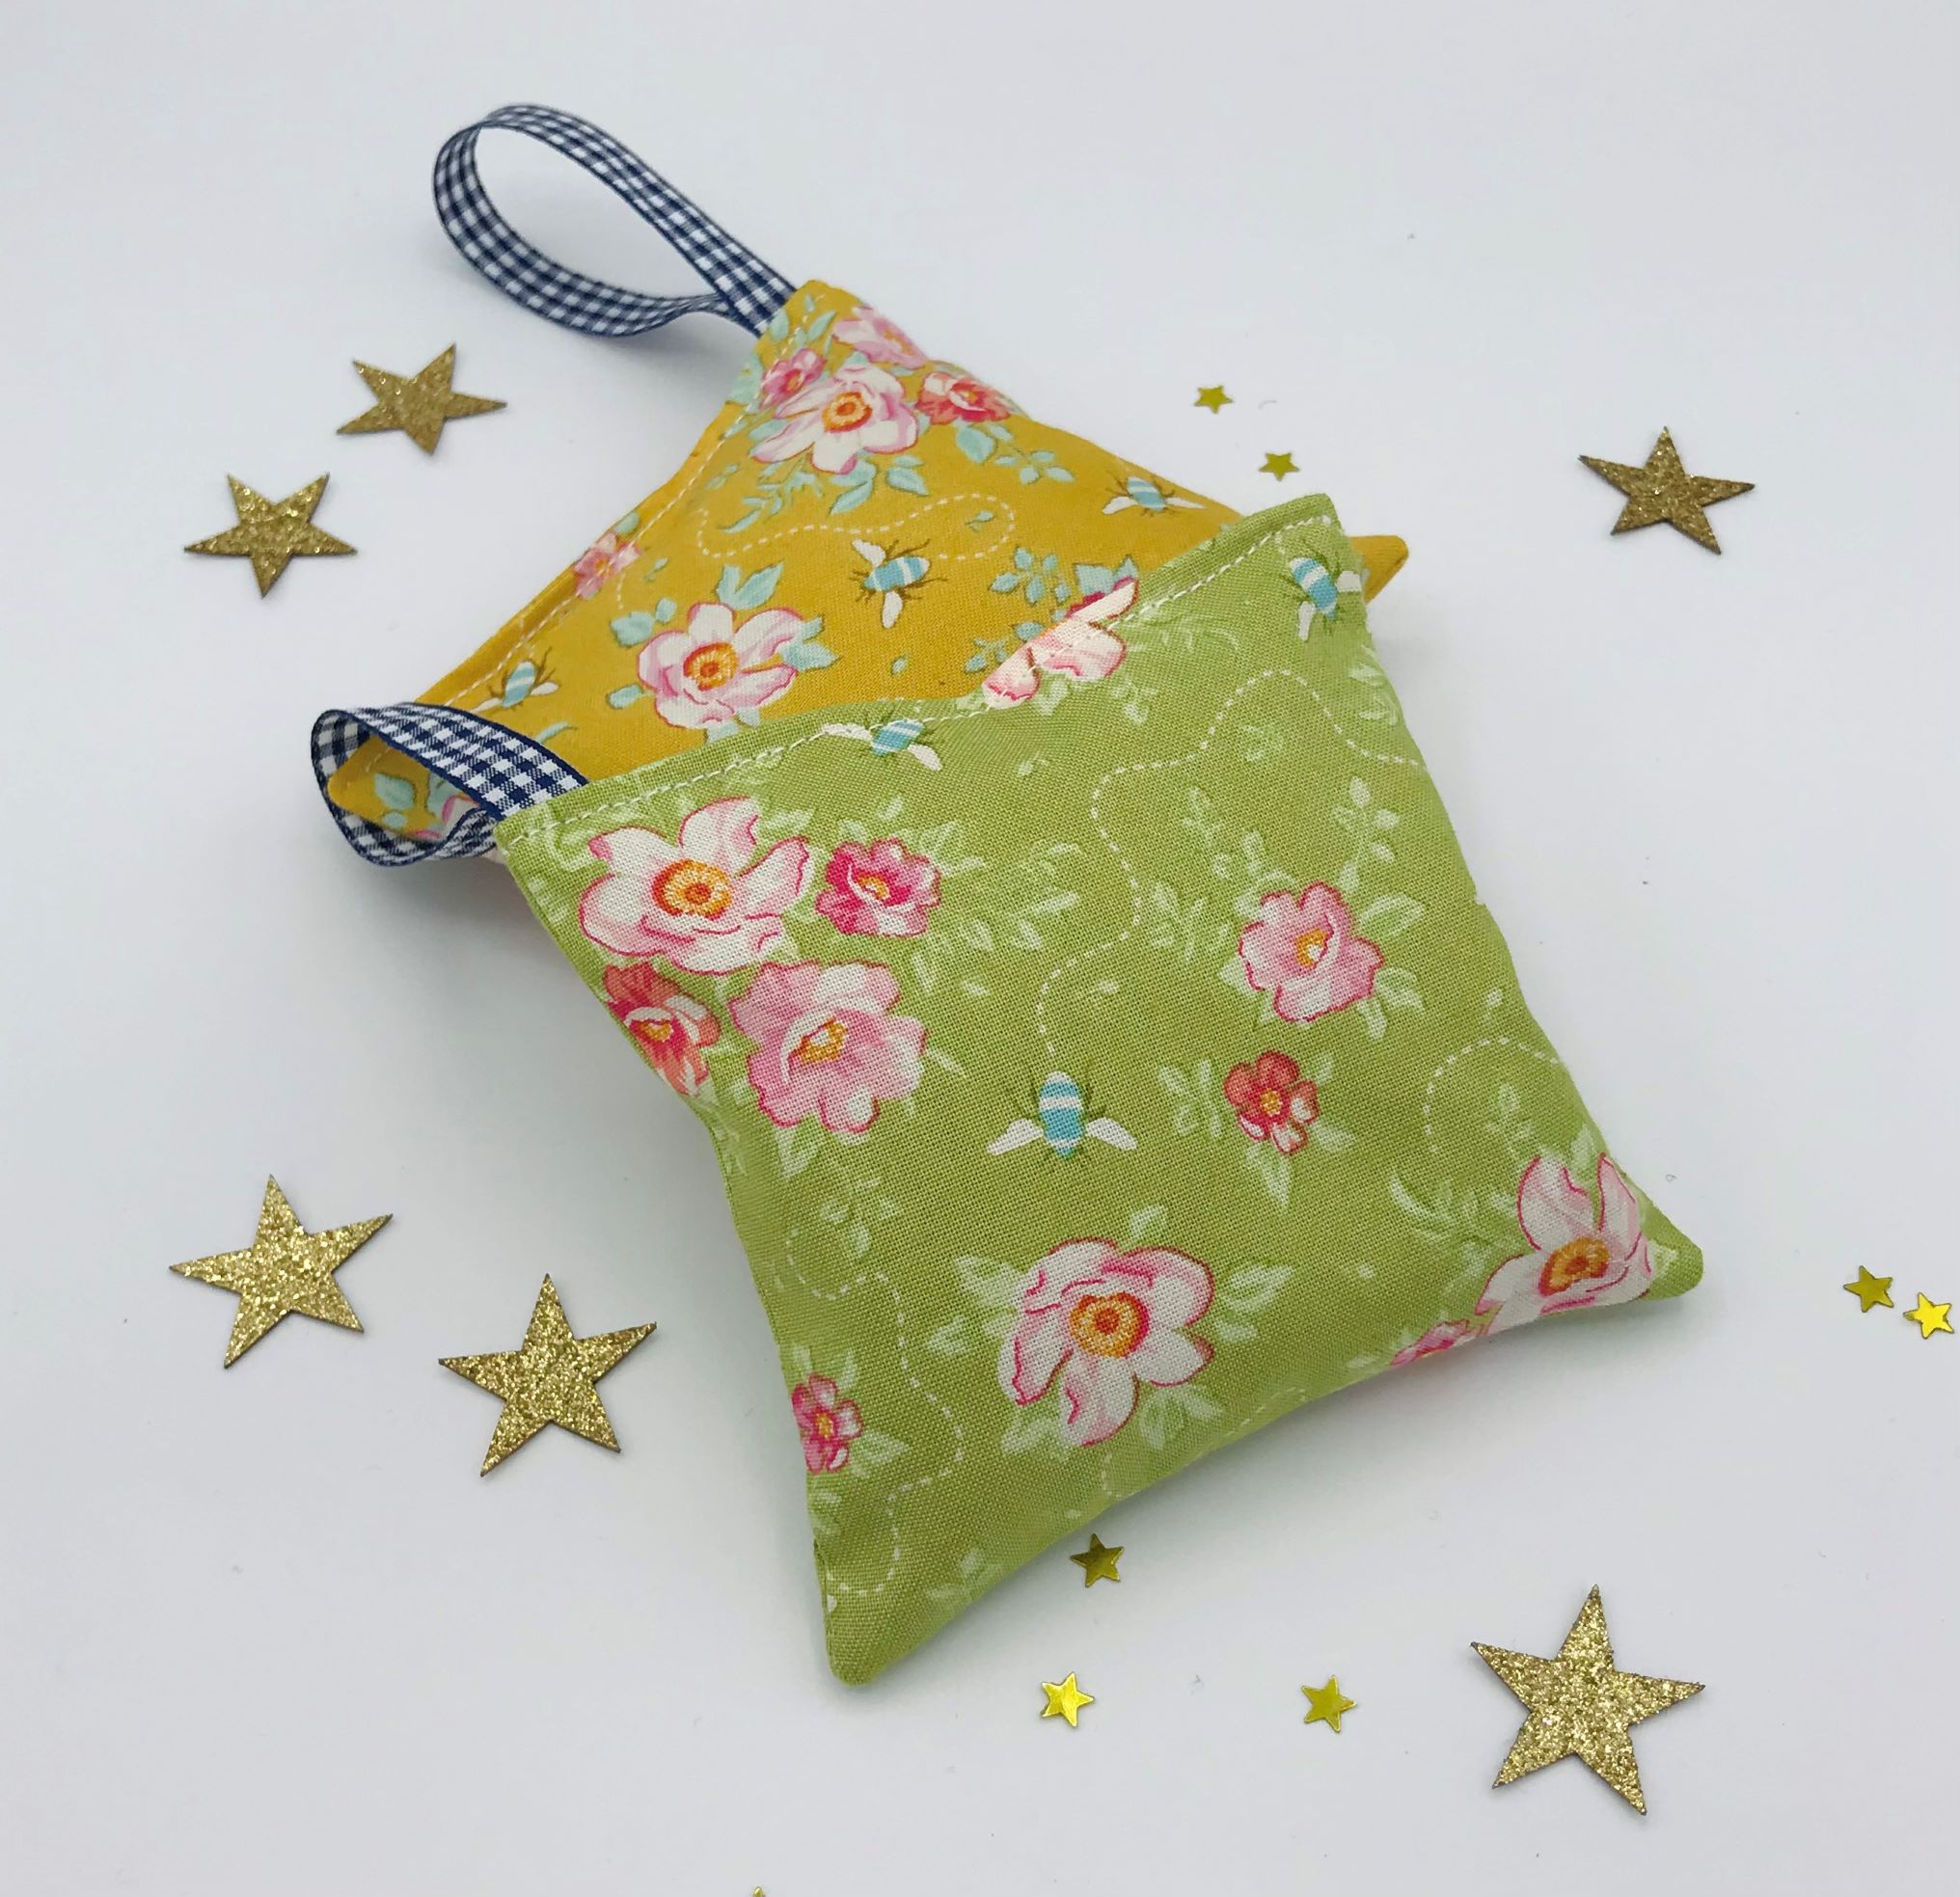 Set of 2 Lavender Bags in Tilda Fabric - one gren one mustard with flowers and bumble bees